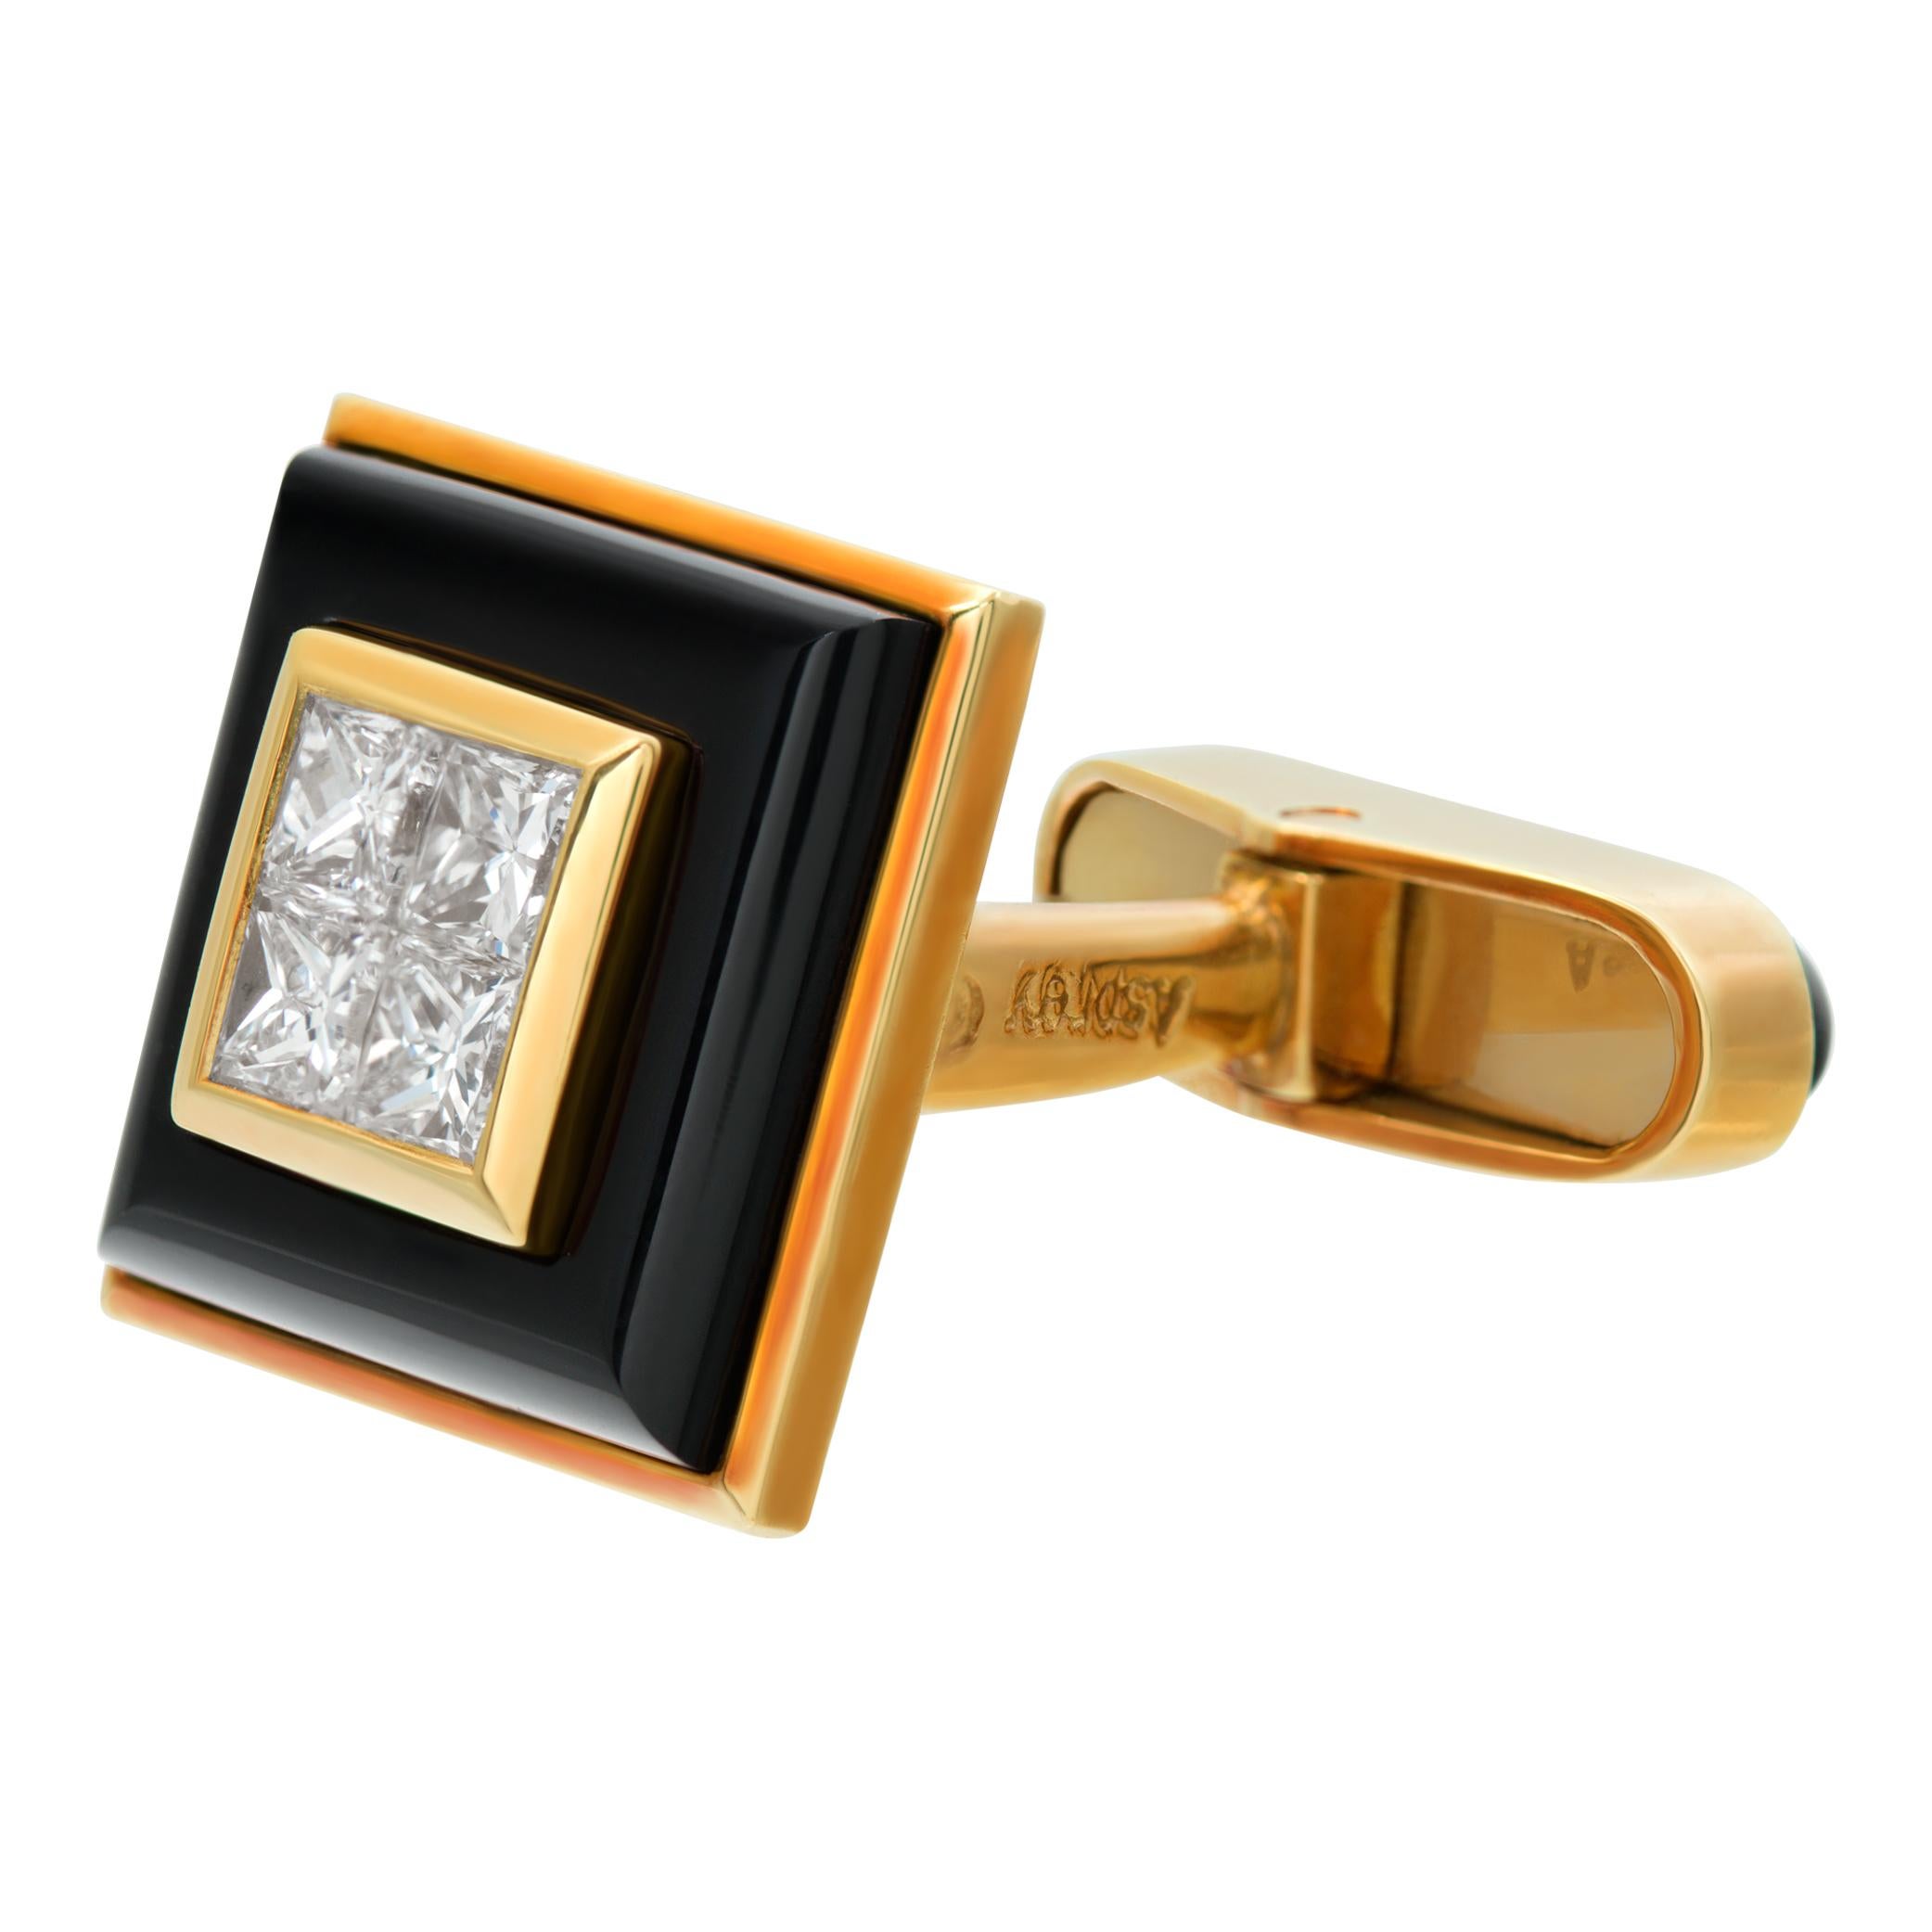 Asprey diamond and onyx cufflinks and 4 piece stud set in 18k yellow gold. Approx. 1.60 carats in princess cut diamonds (G-H Color, VS Clarity). Comes in original box. Asprey is known as the jeweler to the British crown!
